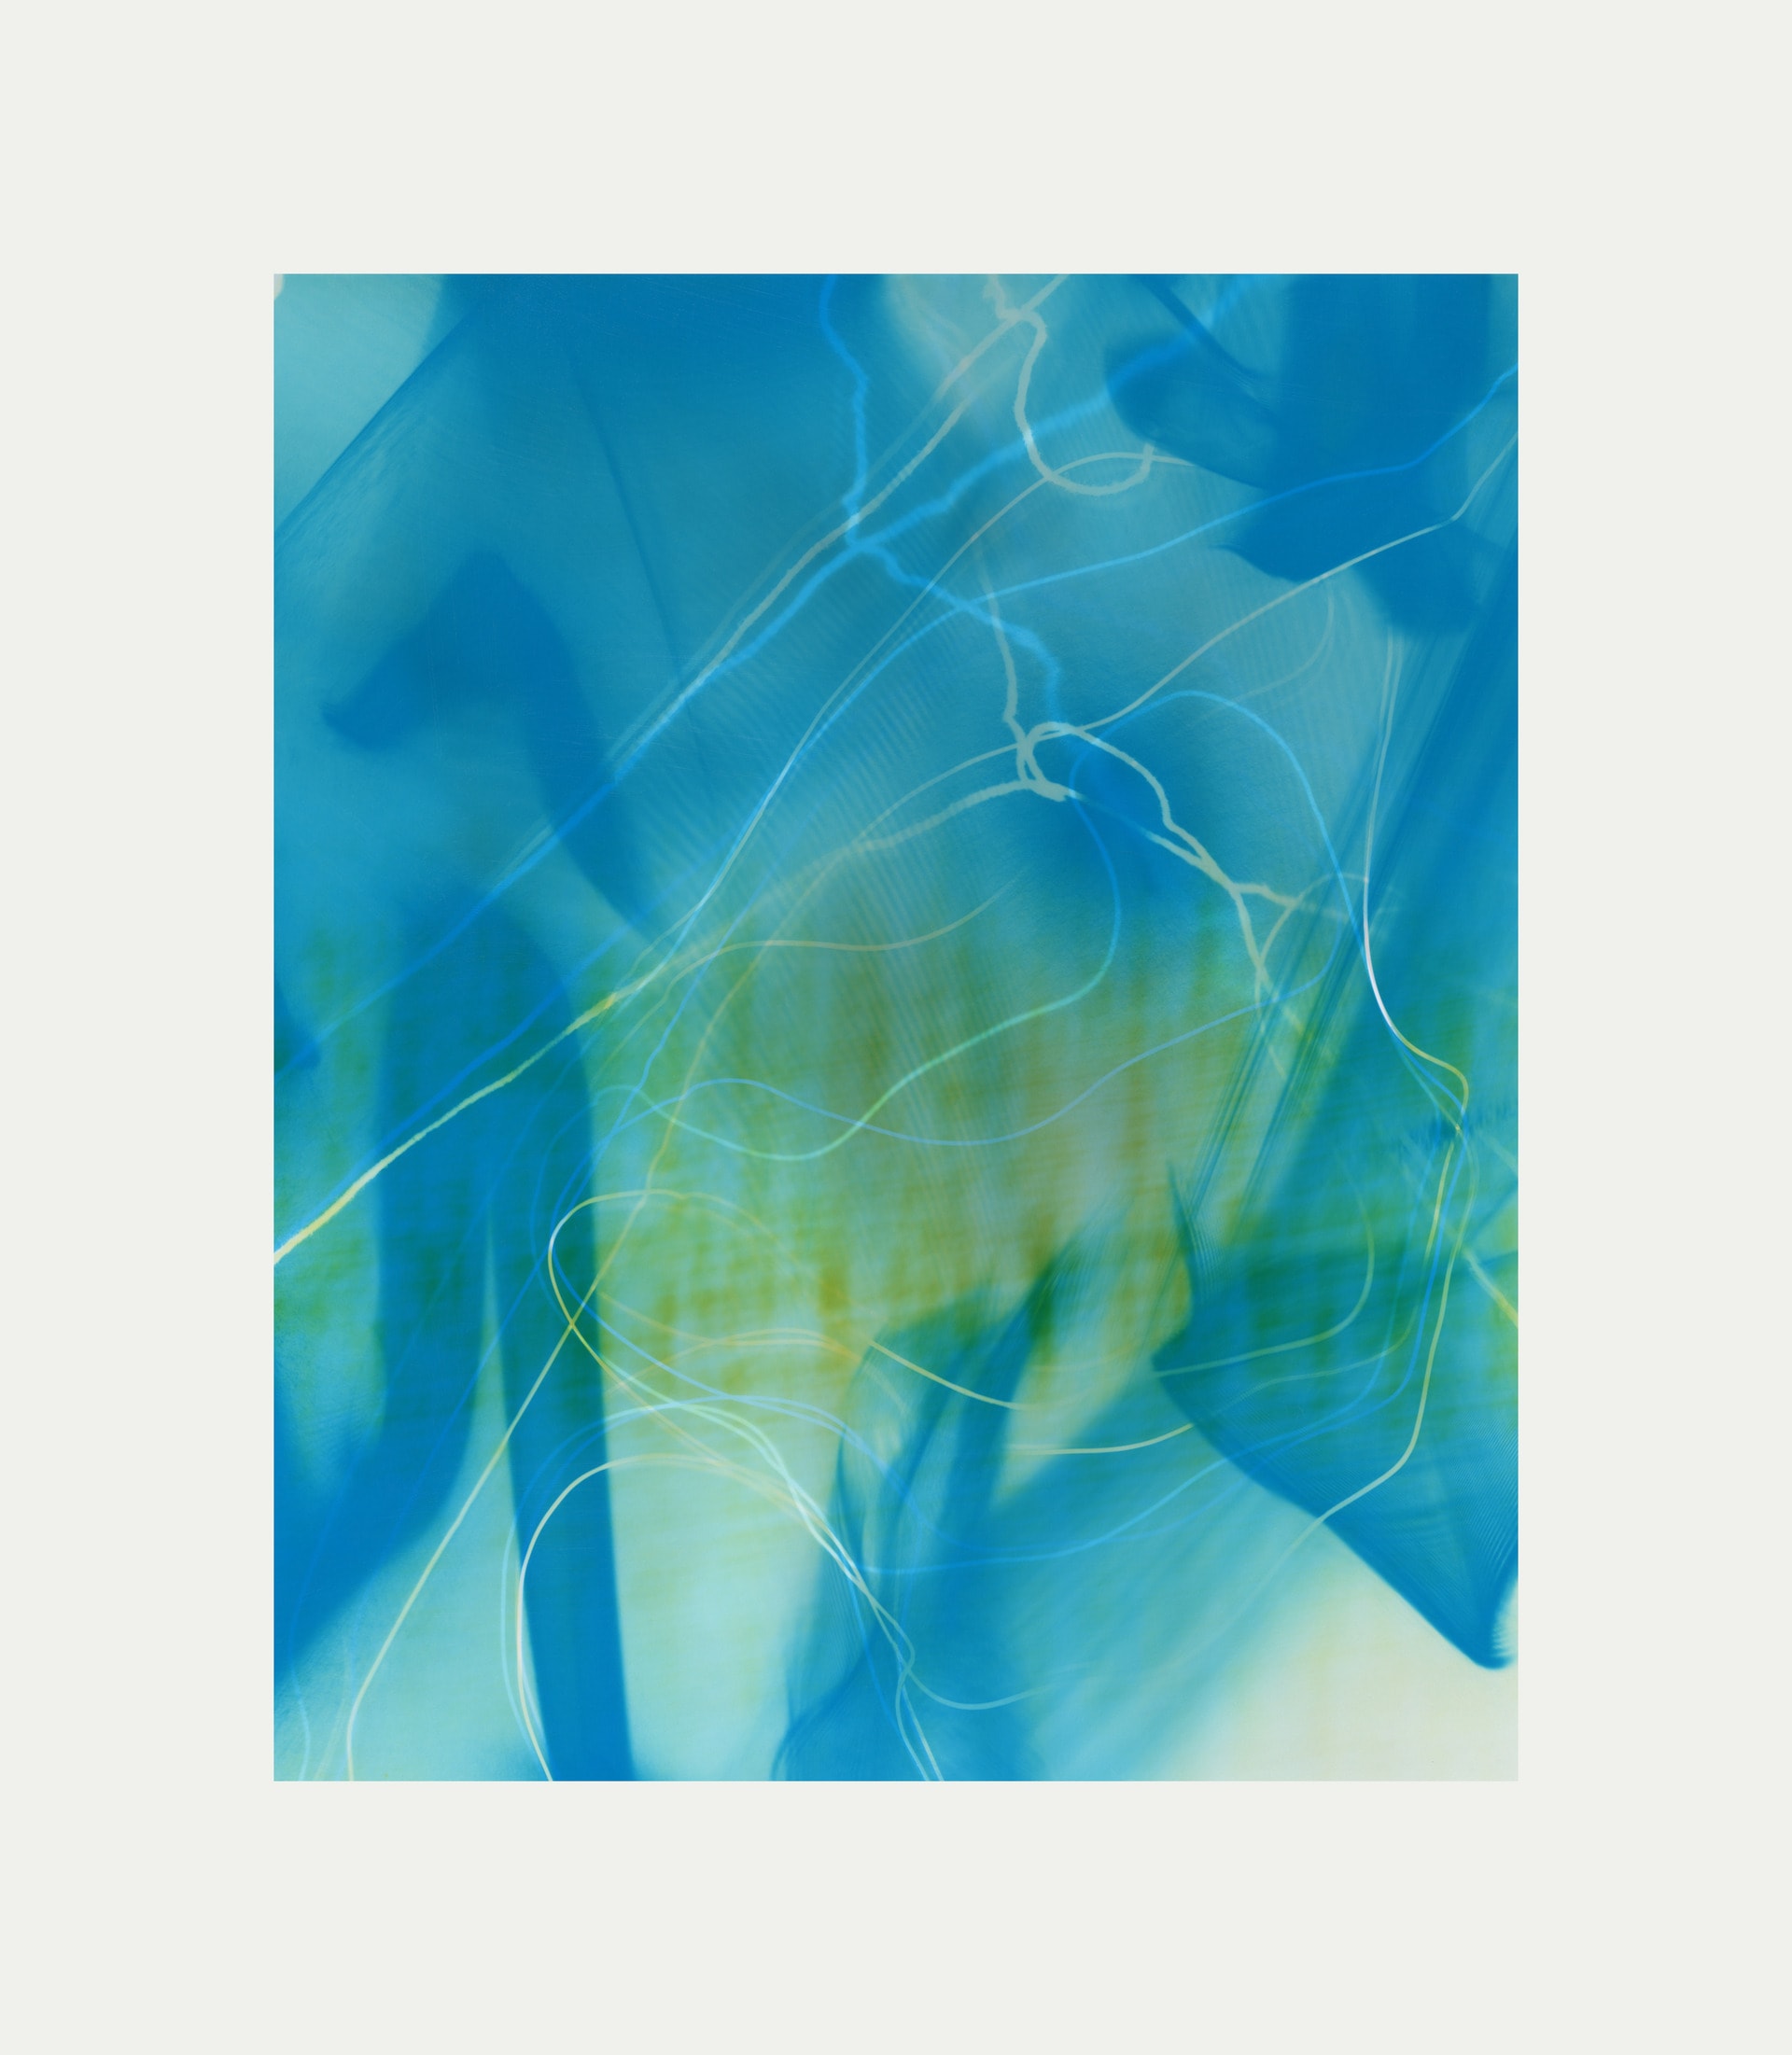  A deep blue photogram with a green form which looks like a sound wave, white and blue string assembly weaves through